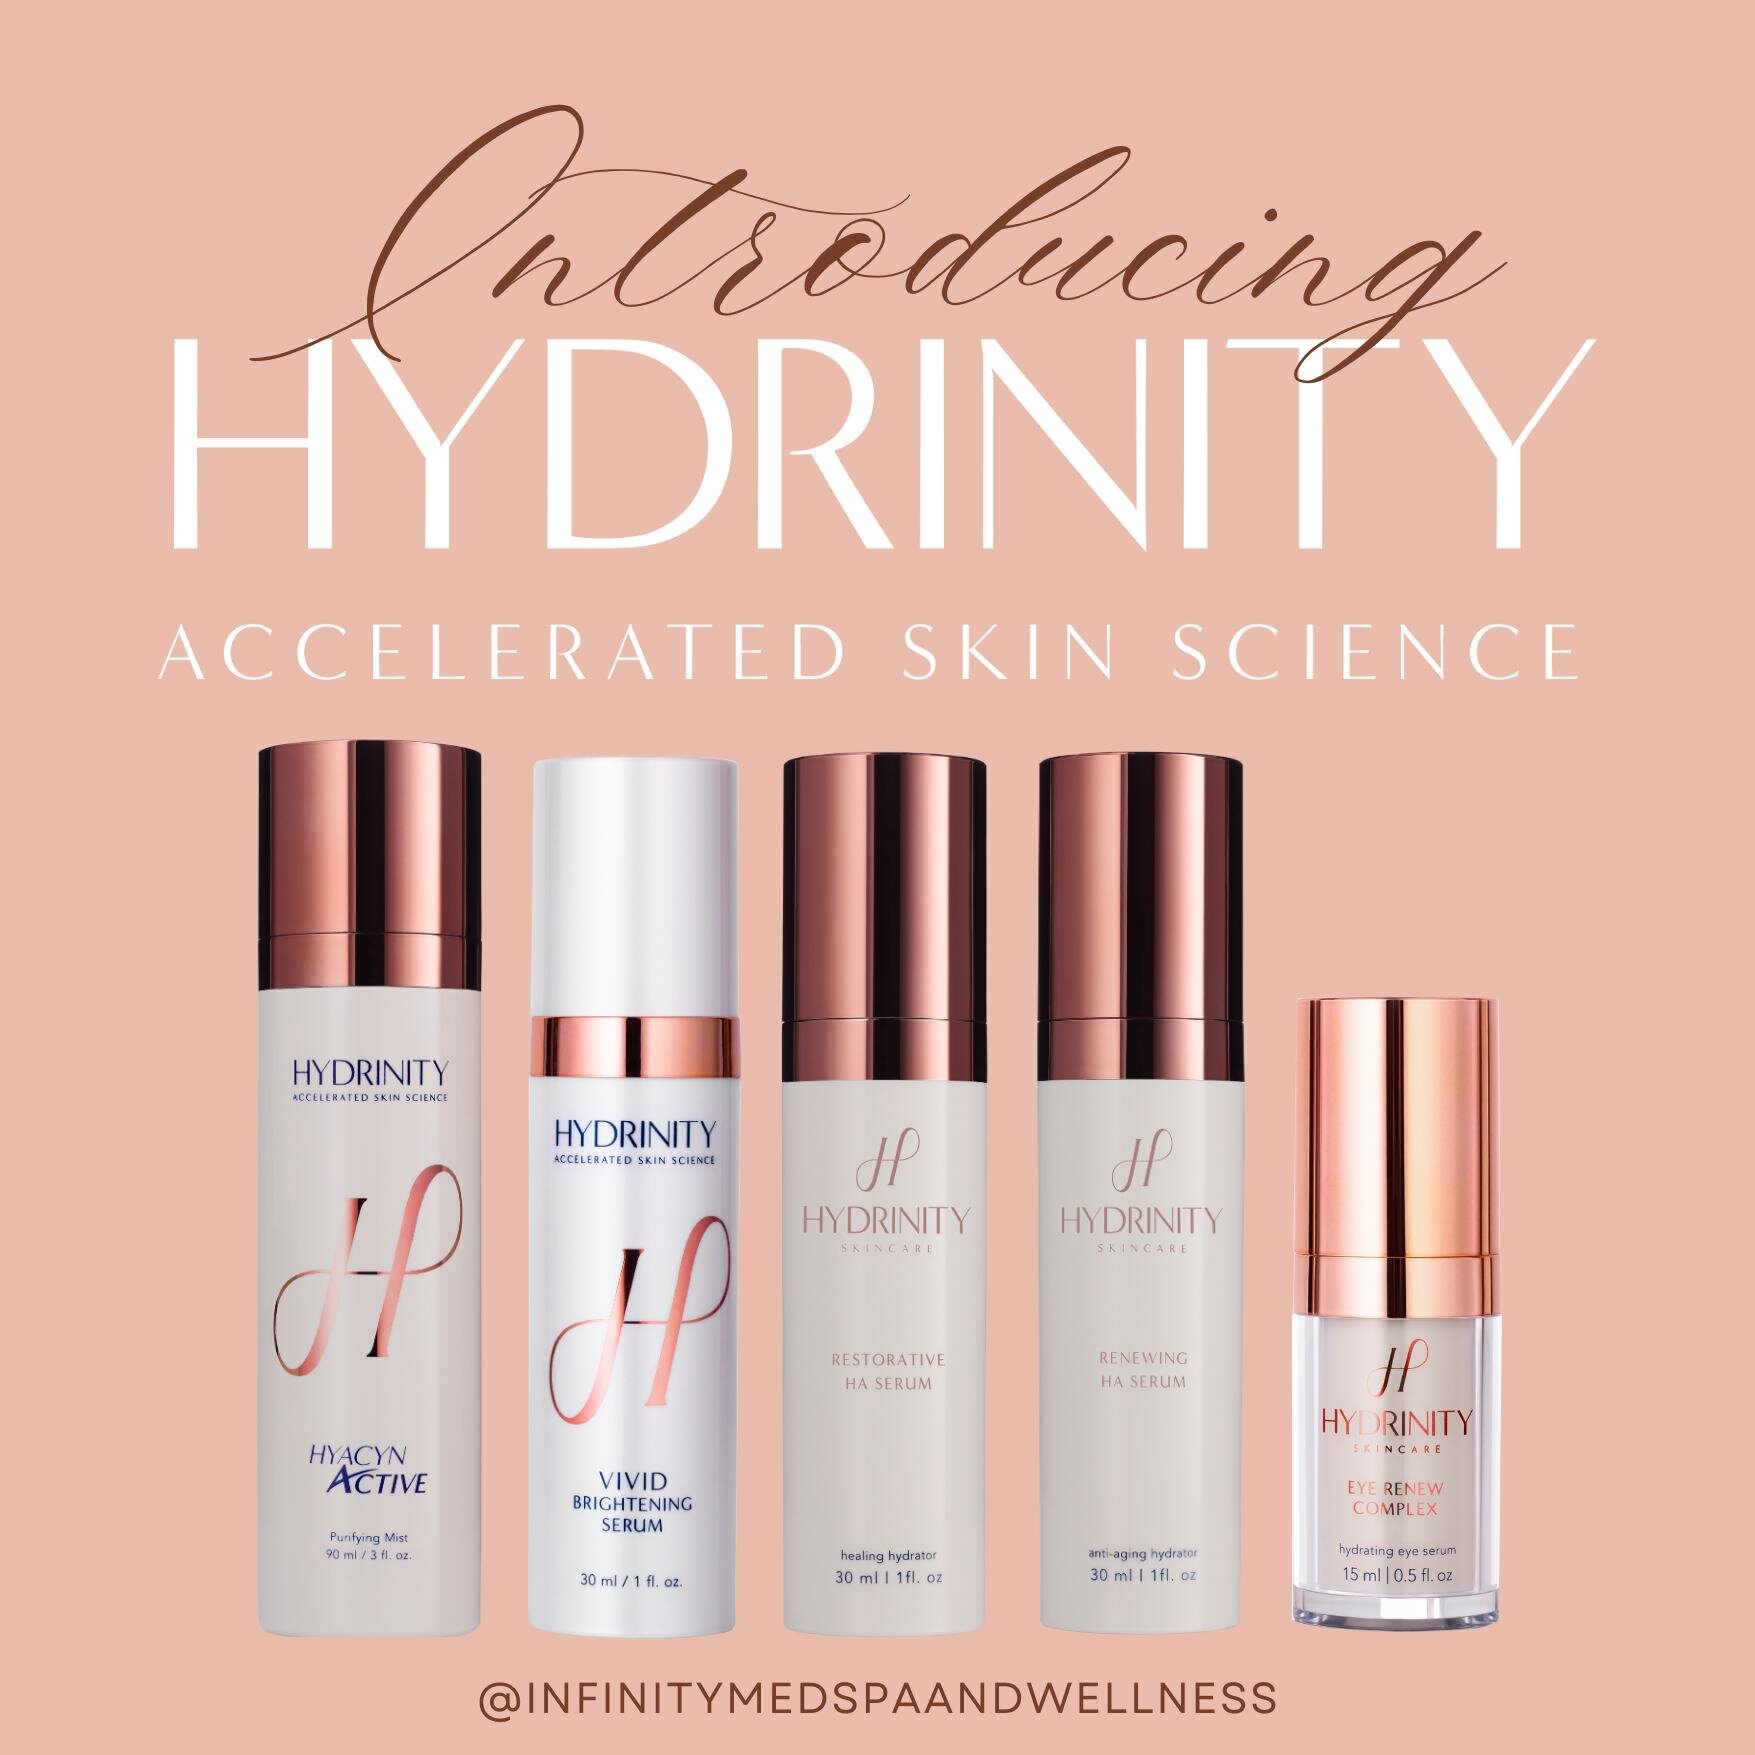 Infinity MedSpa is now carrying Hydrinity products! 😍💕
... and we are OBSESSED!

Hydrinity products:
💛 Hyacyn Active
💛 Vivid Brightening Serum
💛 Restorative Serum
💛 Renewing Serum
💛  Eye Renew Serum

Purchase in-store, online or over the phone